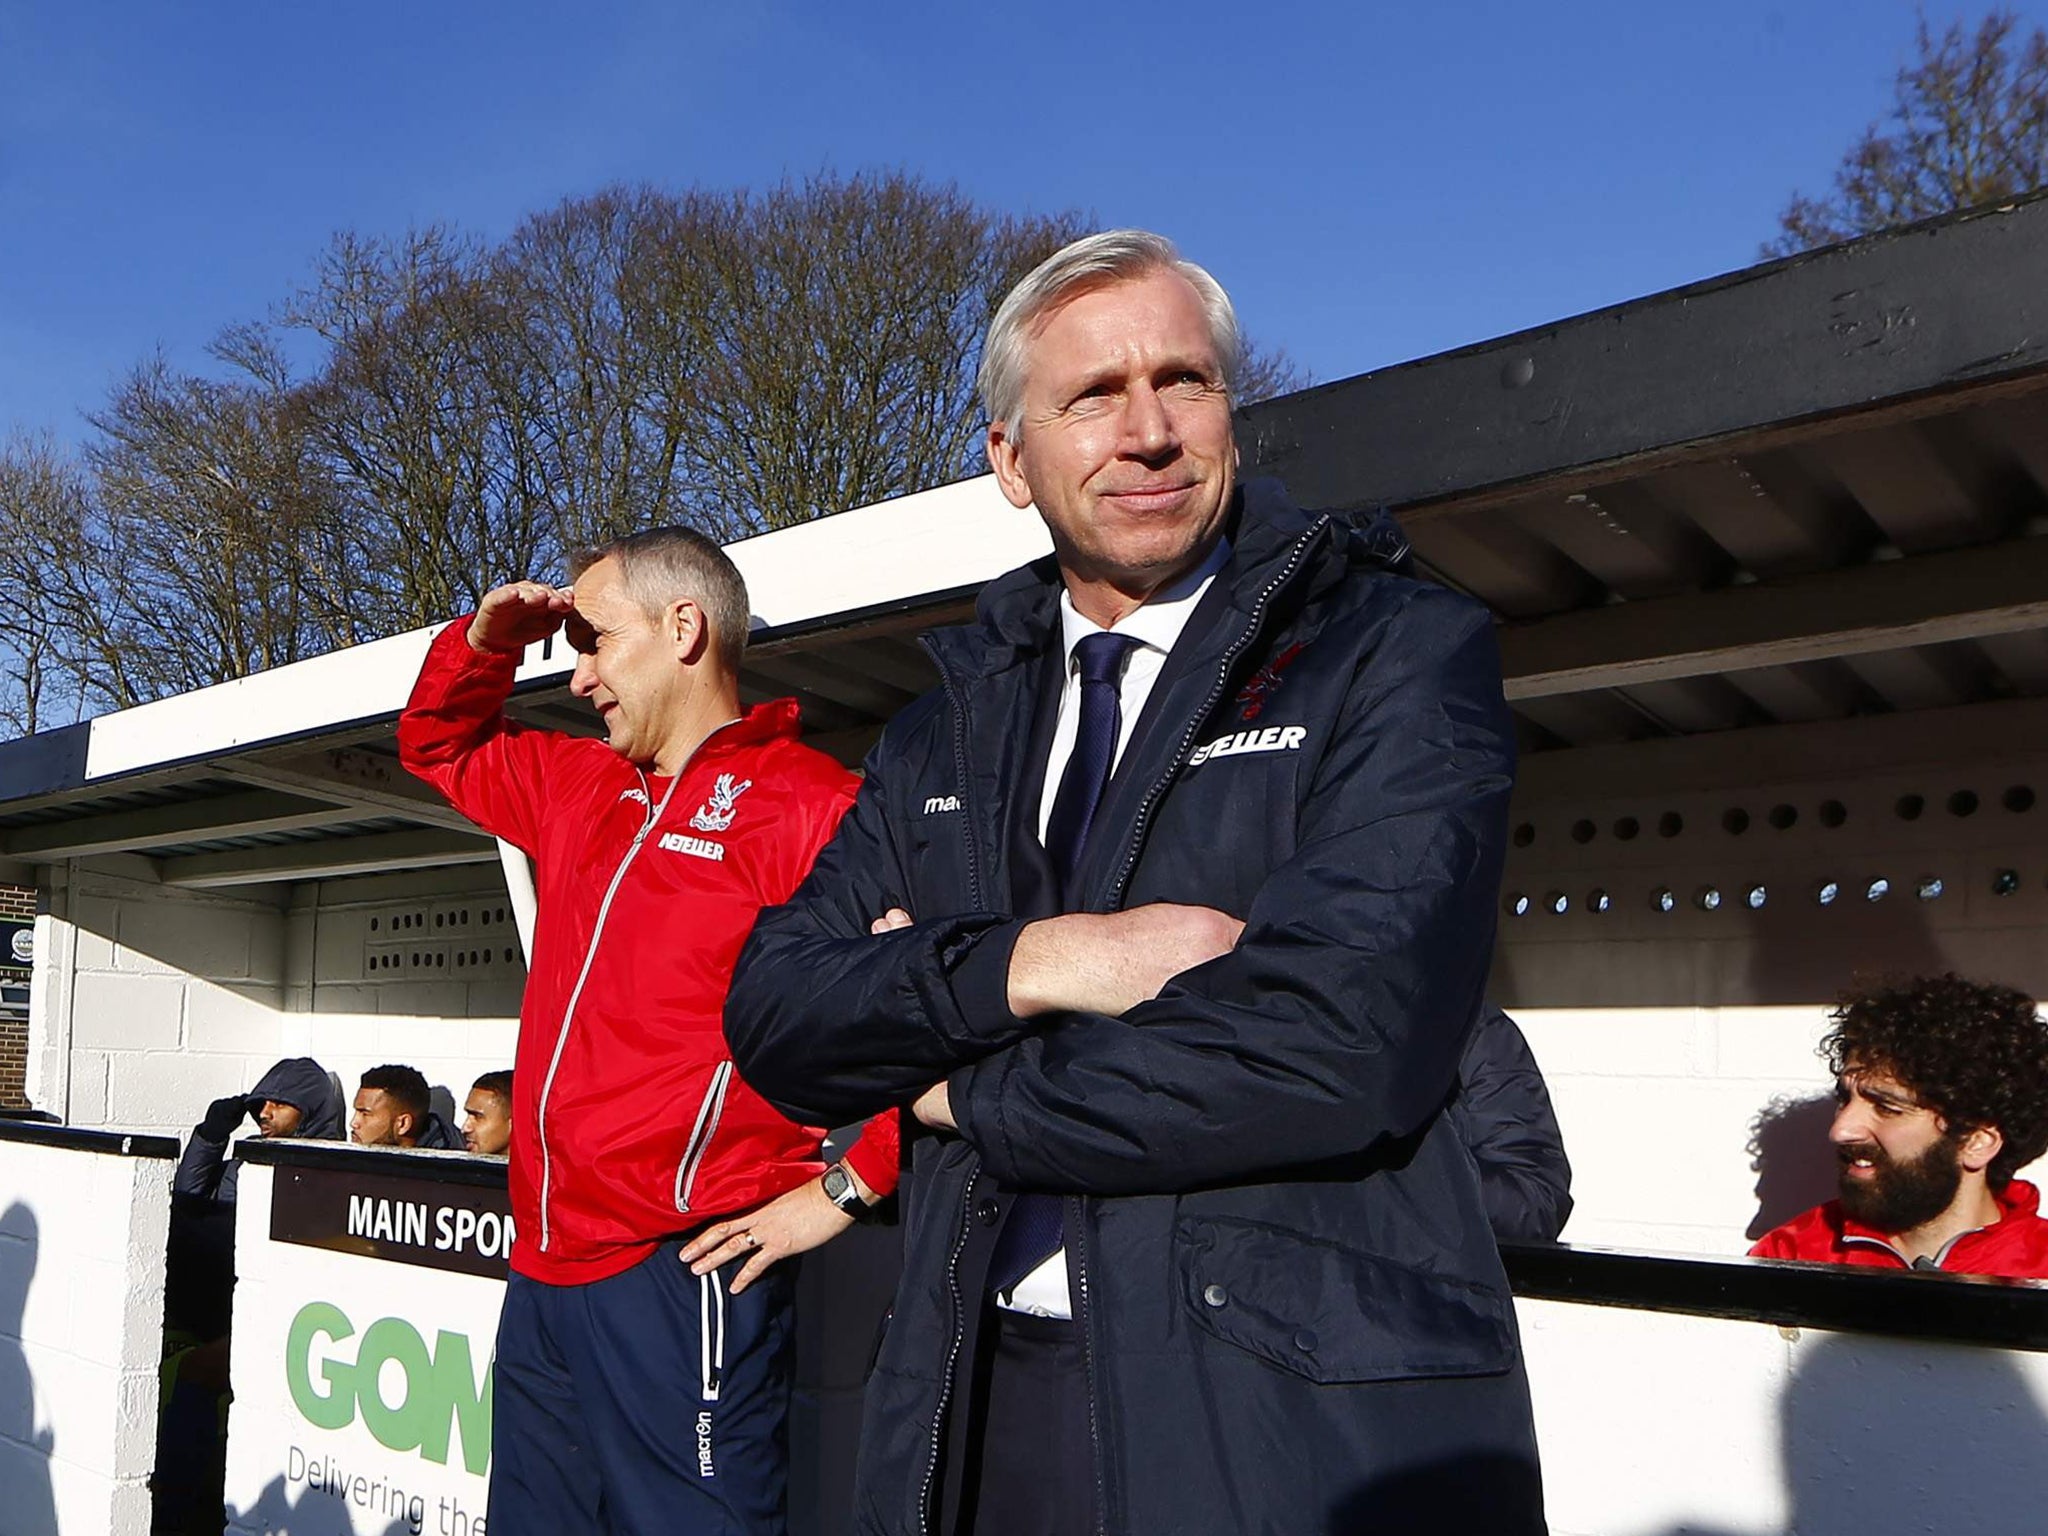 Alan Pardew says Newcastle are a club run on fairly tight margins and fans did not understand that